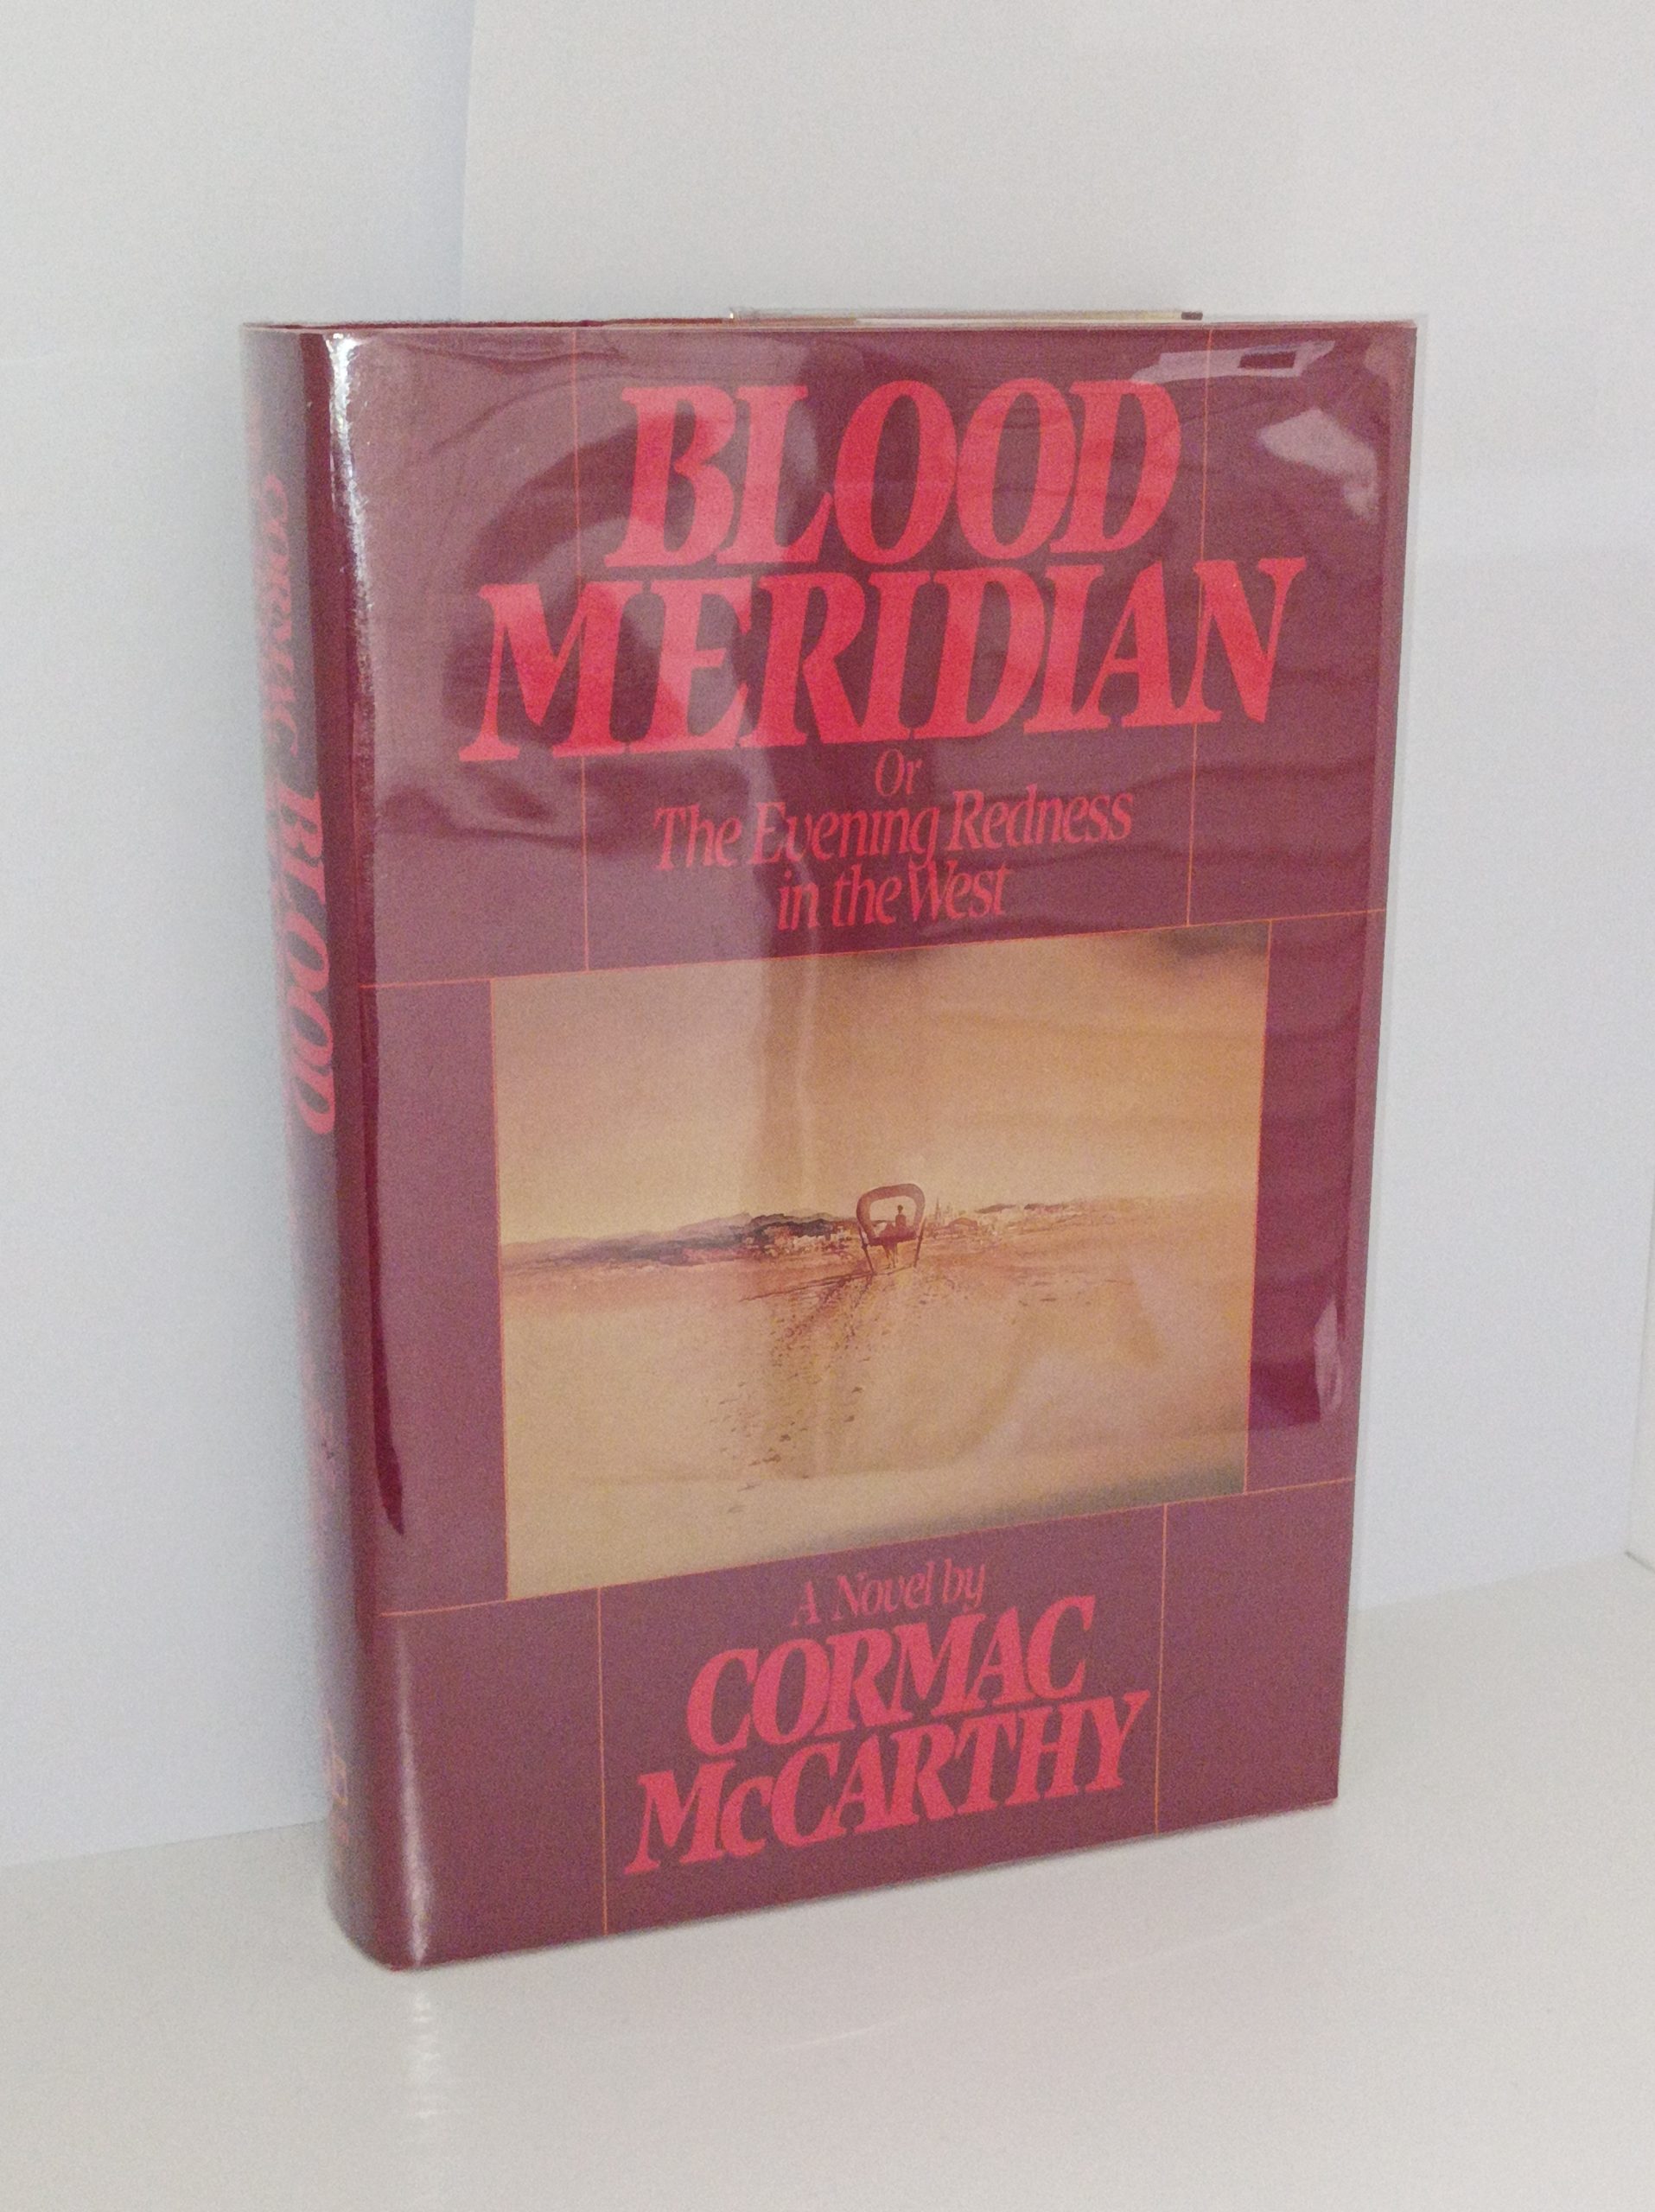 Rare First Edition 'Blood Meridian